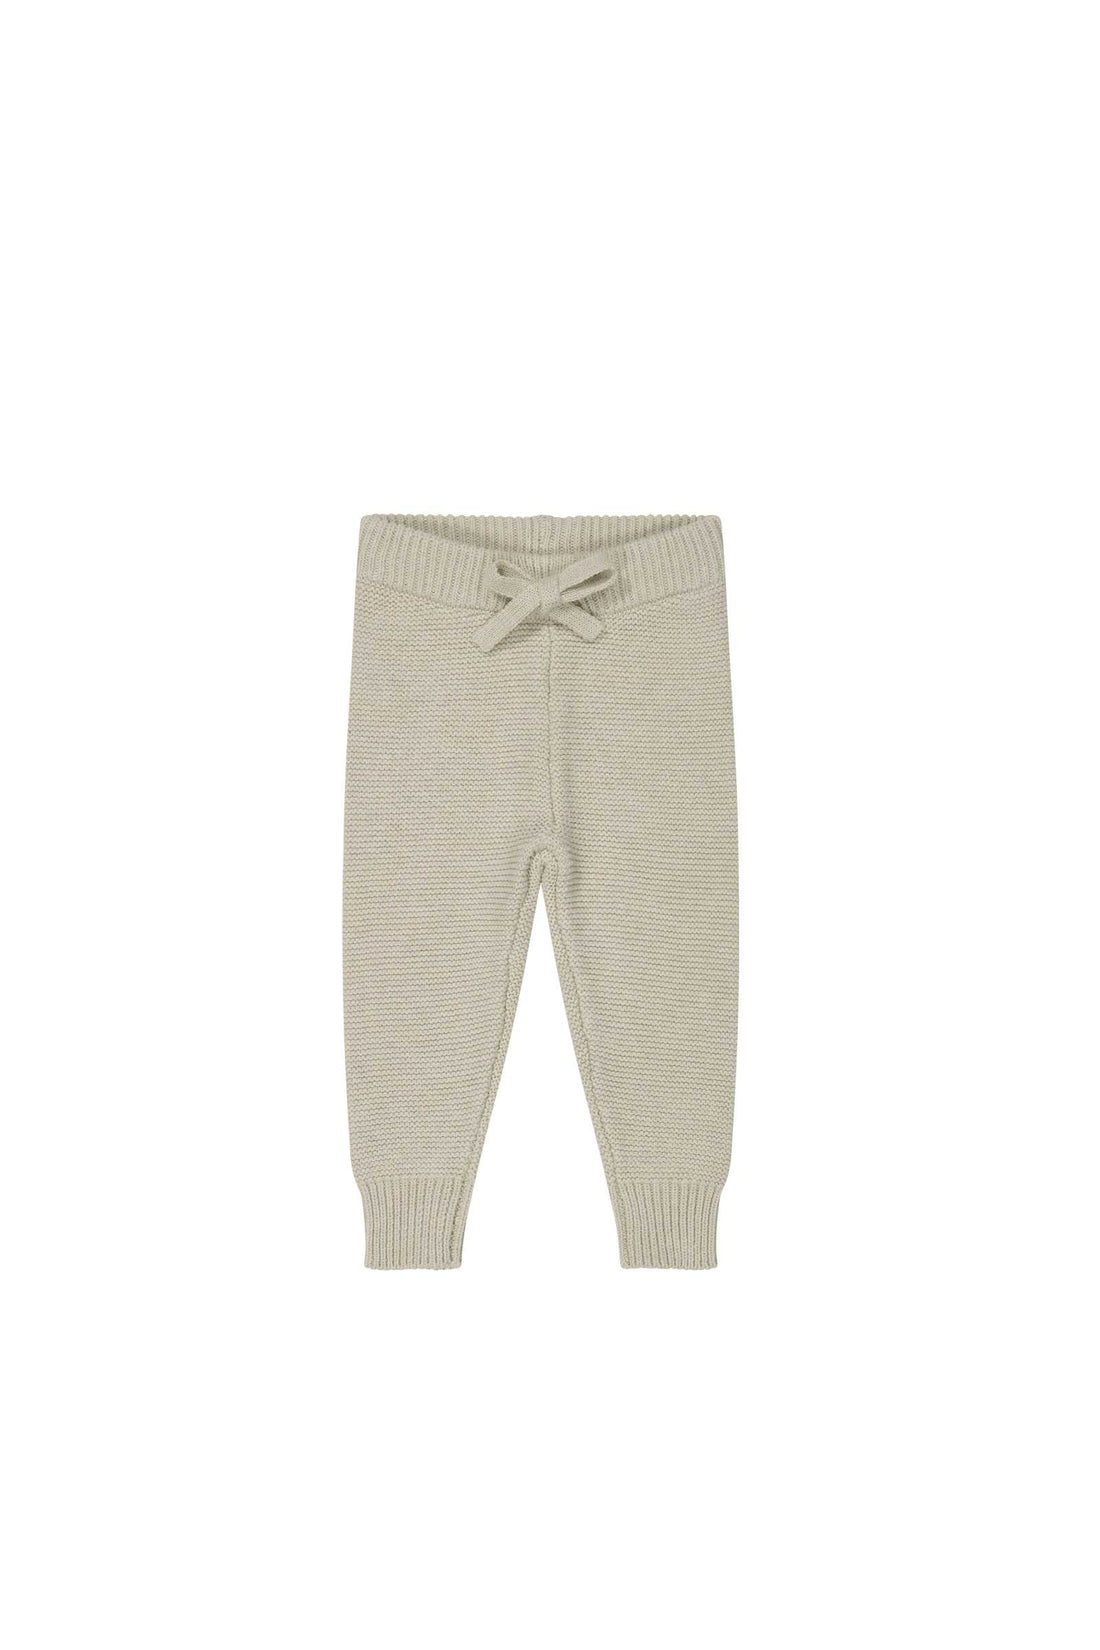 Ethan Pant - Sage Marle Childrens Pant from Jamie Kay USA